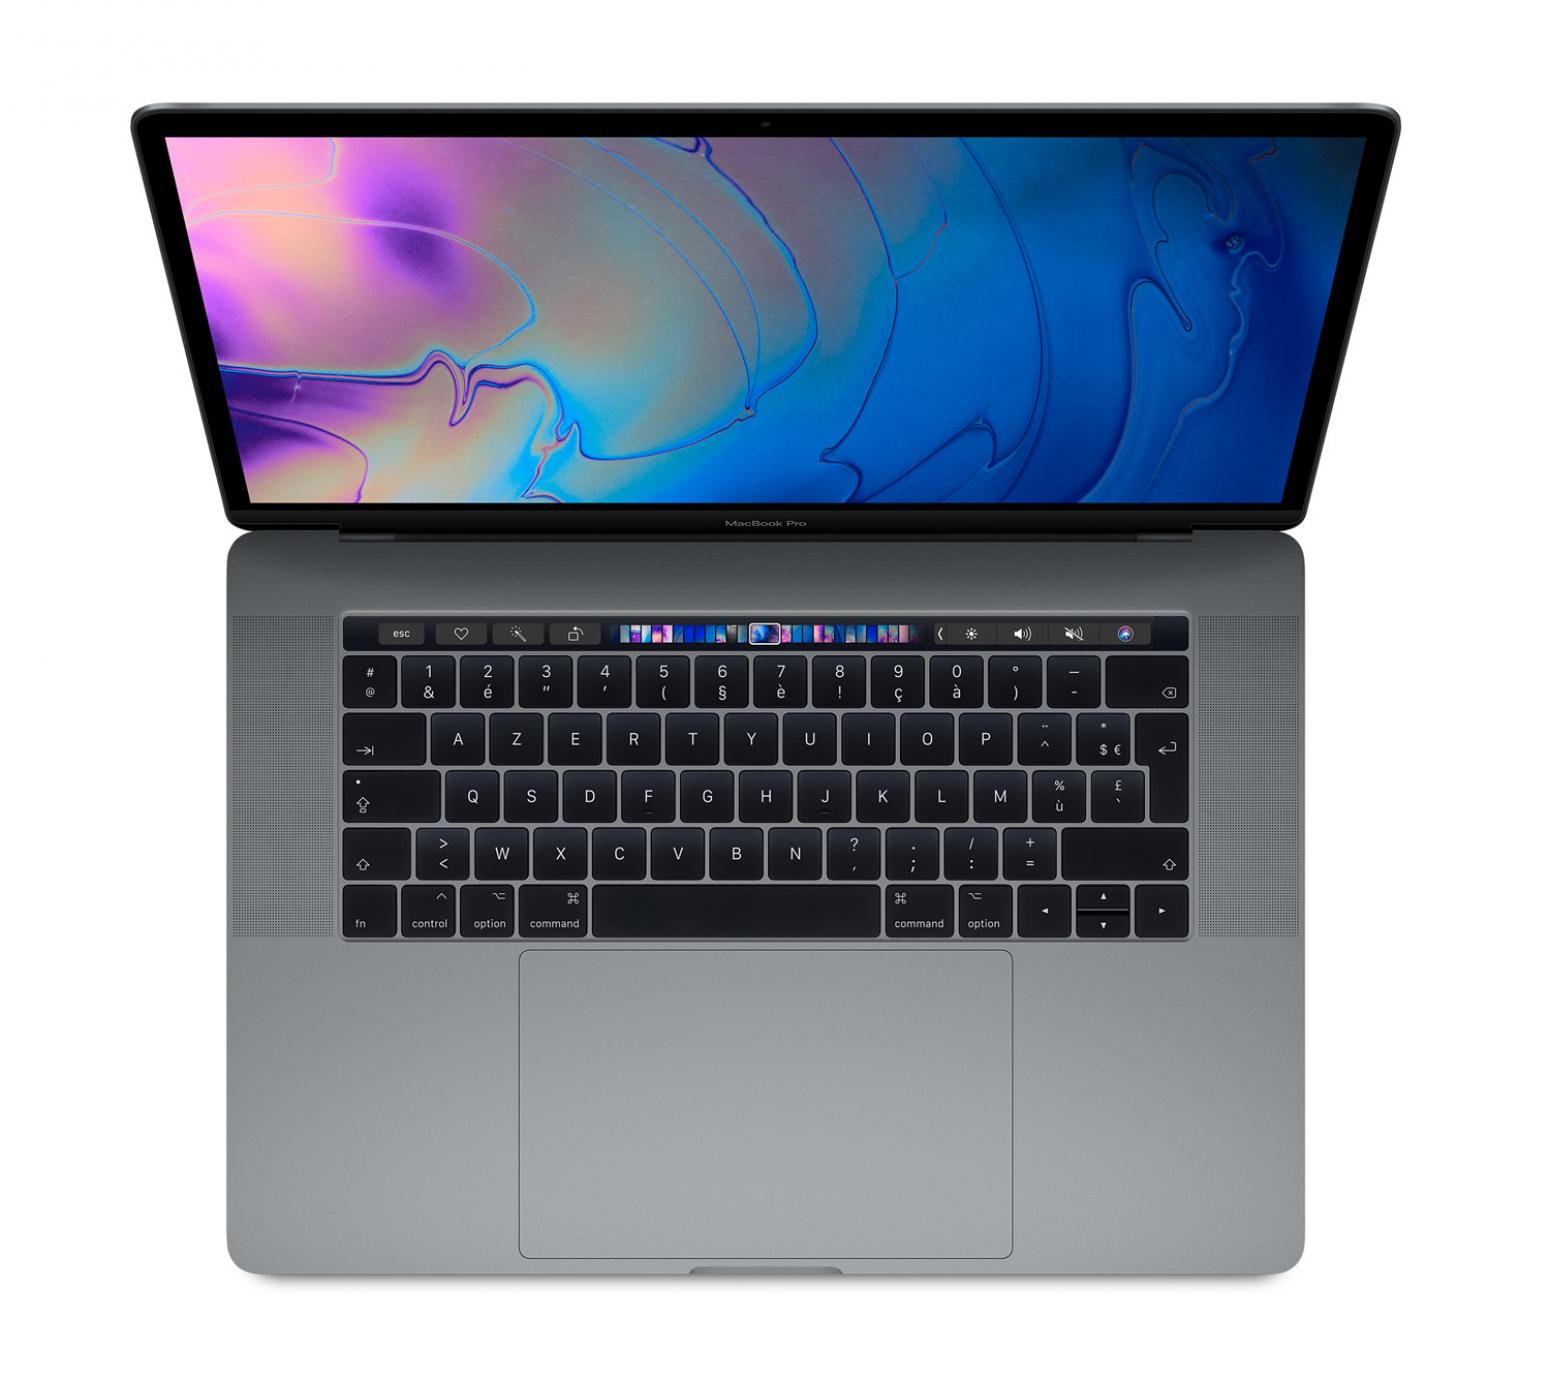 Image du PC portable Apple MacBook Pro 15 Touch Bar 2019 Gris - Octo i9, 1 To